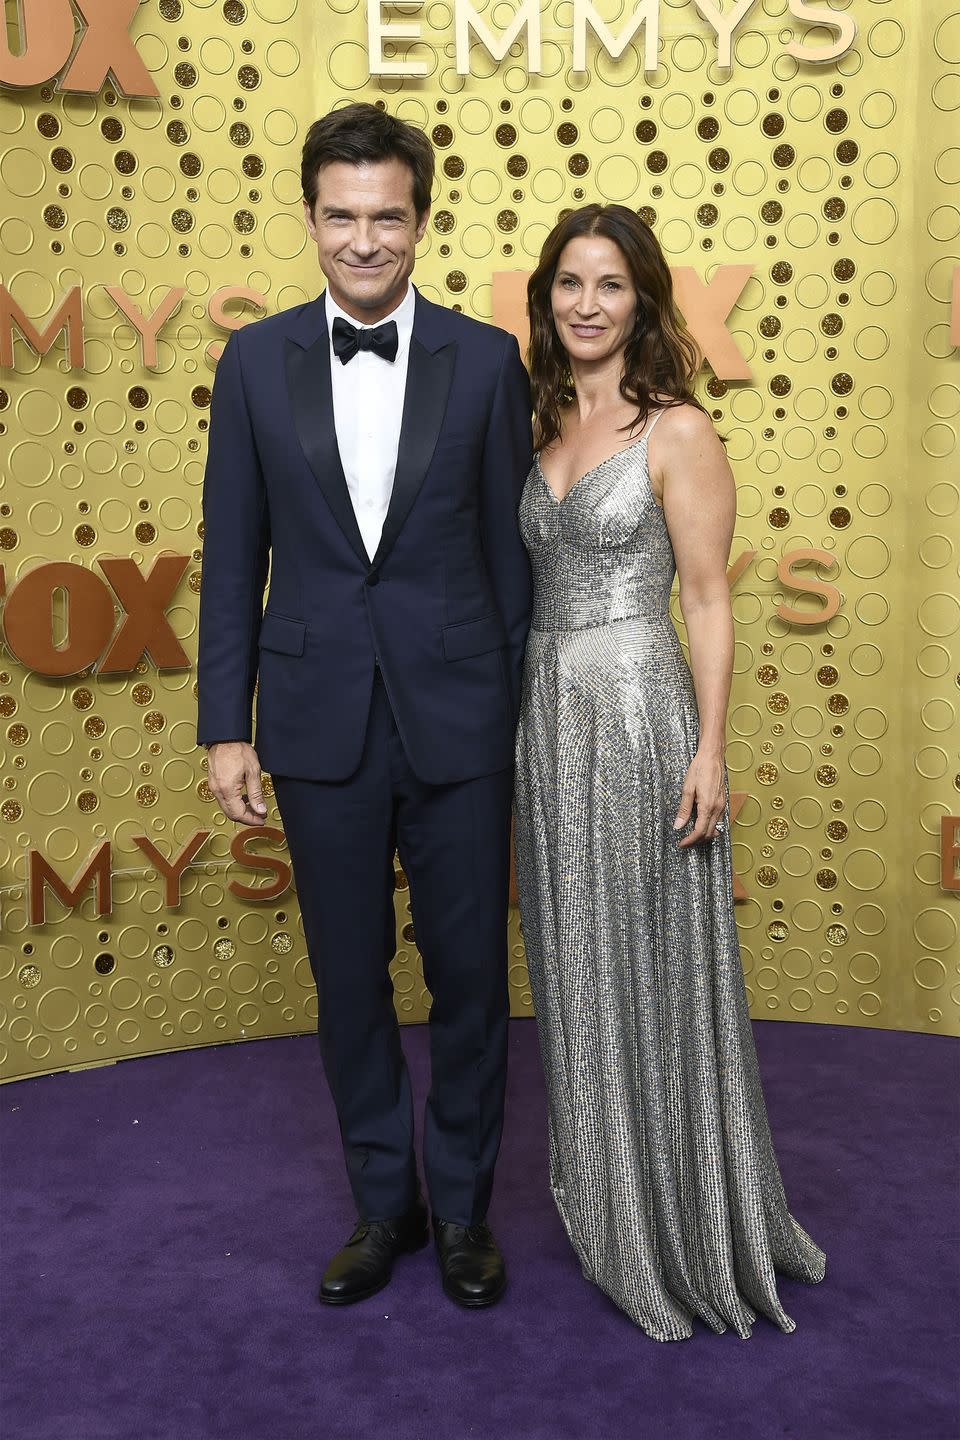 The Cutest Celebrity Couples at the 2019 Emmys